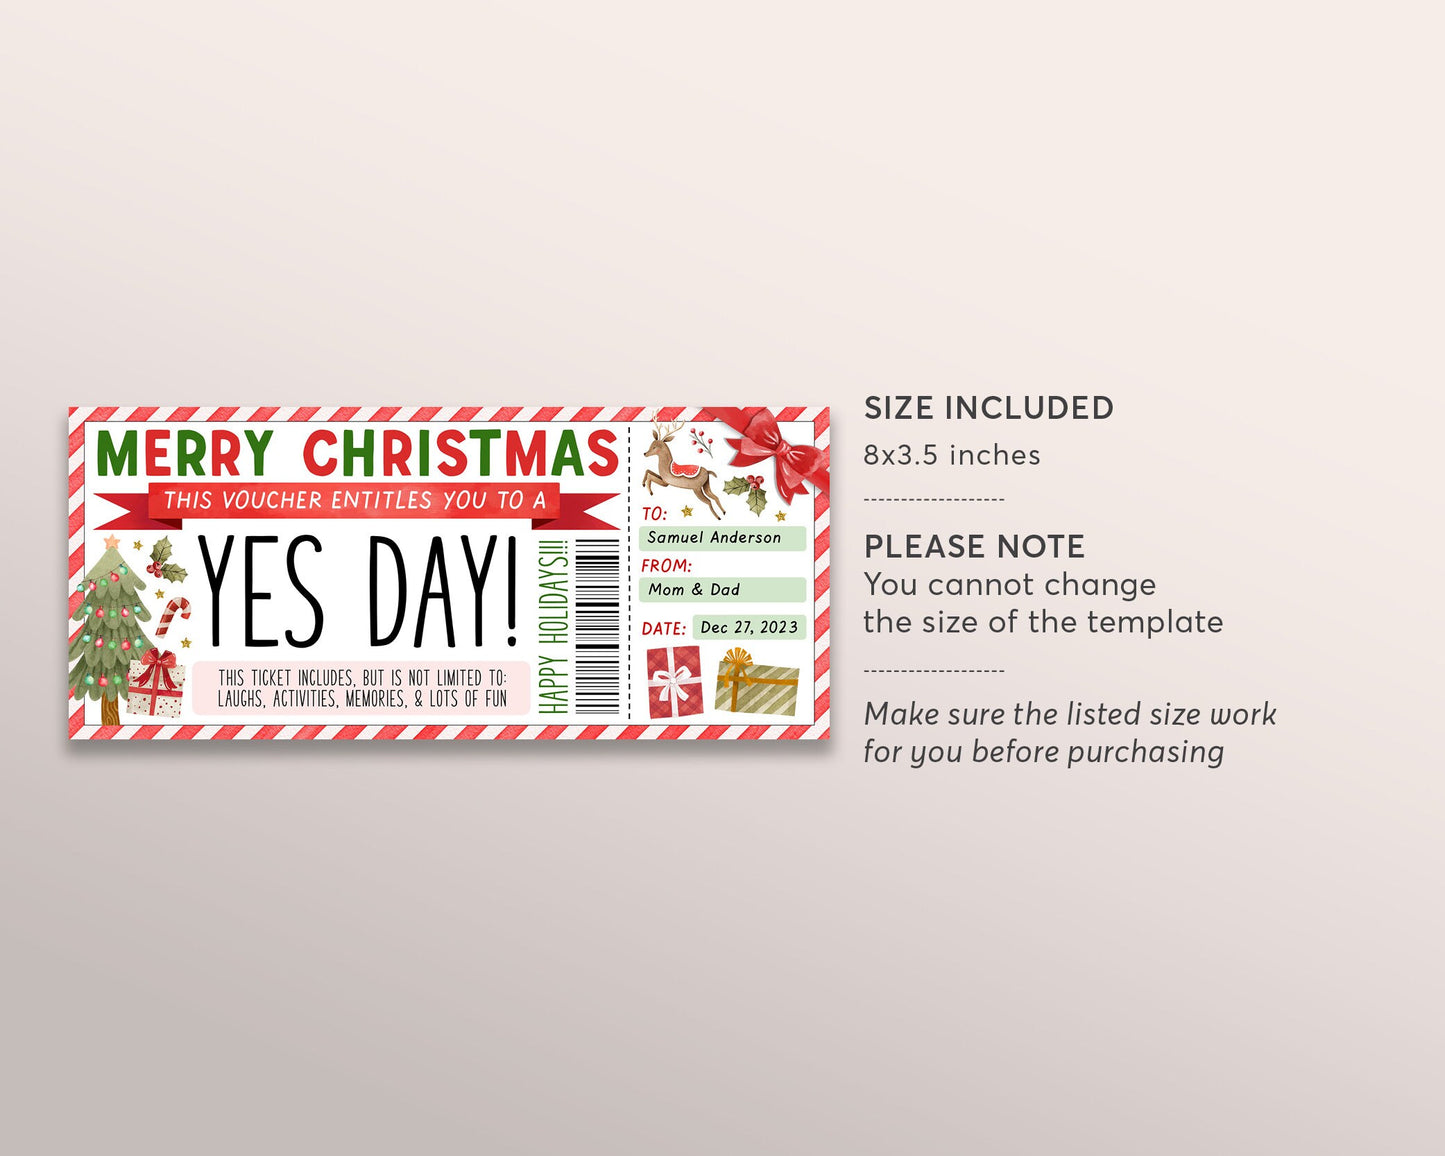 Christmas Yes Day Ticket Editable Template, Surprise Best Day Ever Gift Certificate For Kids Holiday Gift Card Fun Experience Voucher Coupon